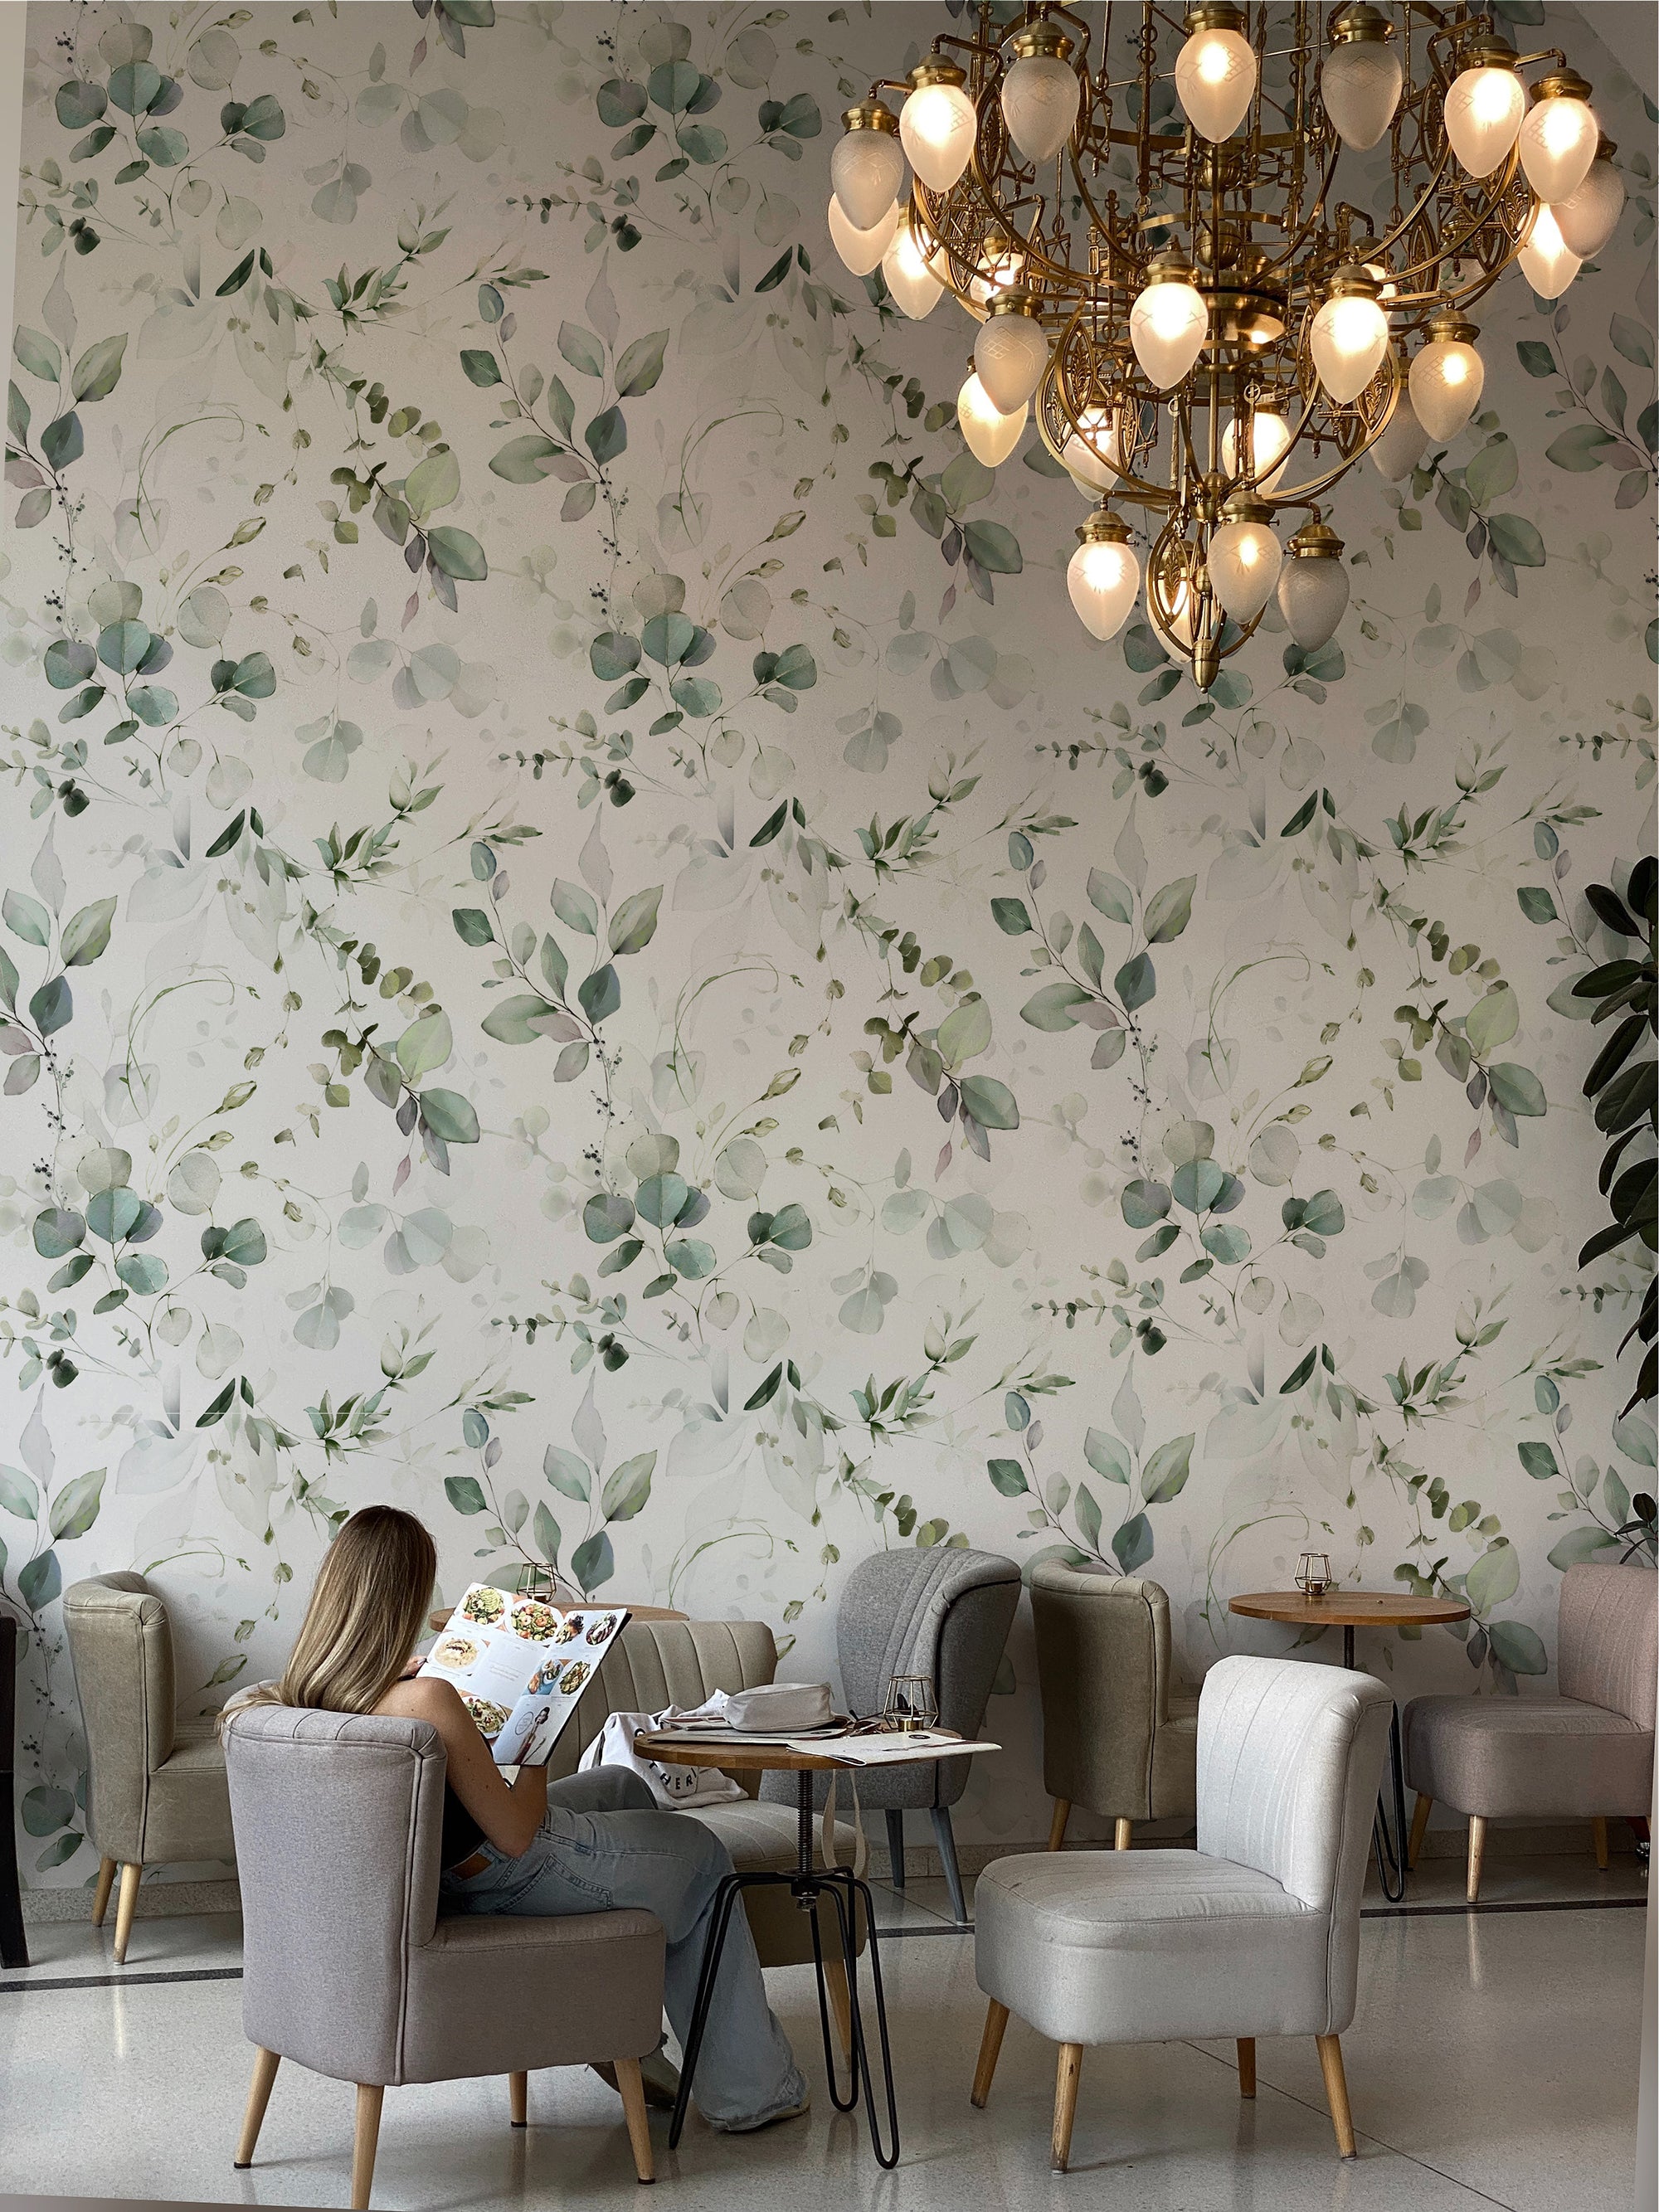 An elegant cafe interior showcasing the Eucalyptus Wallpaper with lush green and soft grey eucalyptus leaf patterns, a woman seated reading a menu, under the warm glow of a sophisticated golden chandelier.